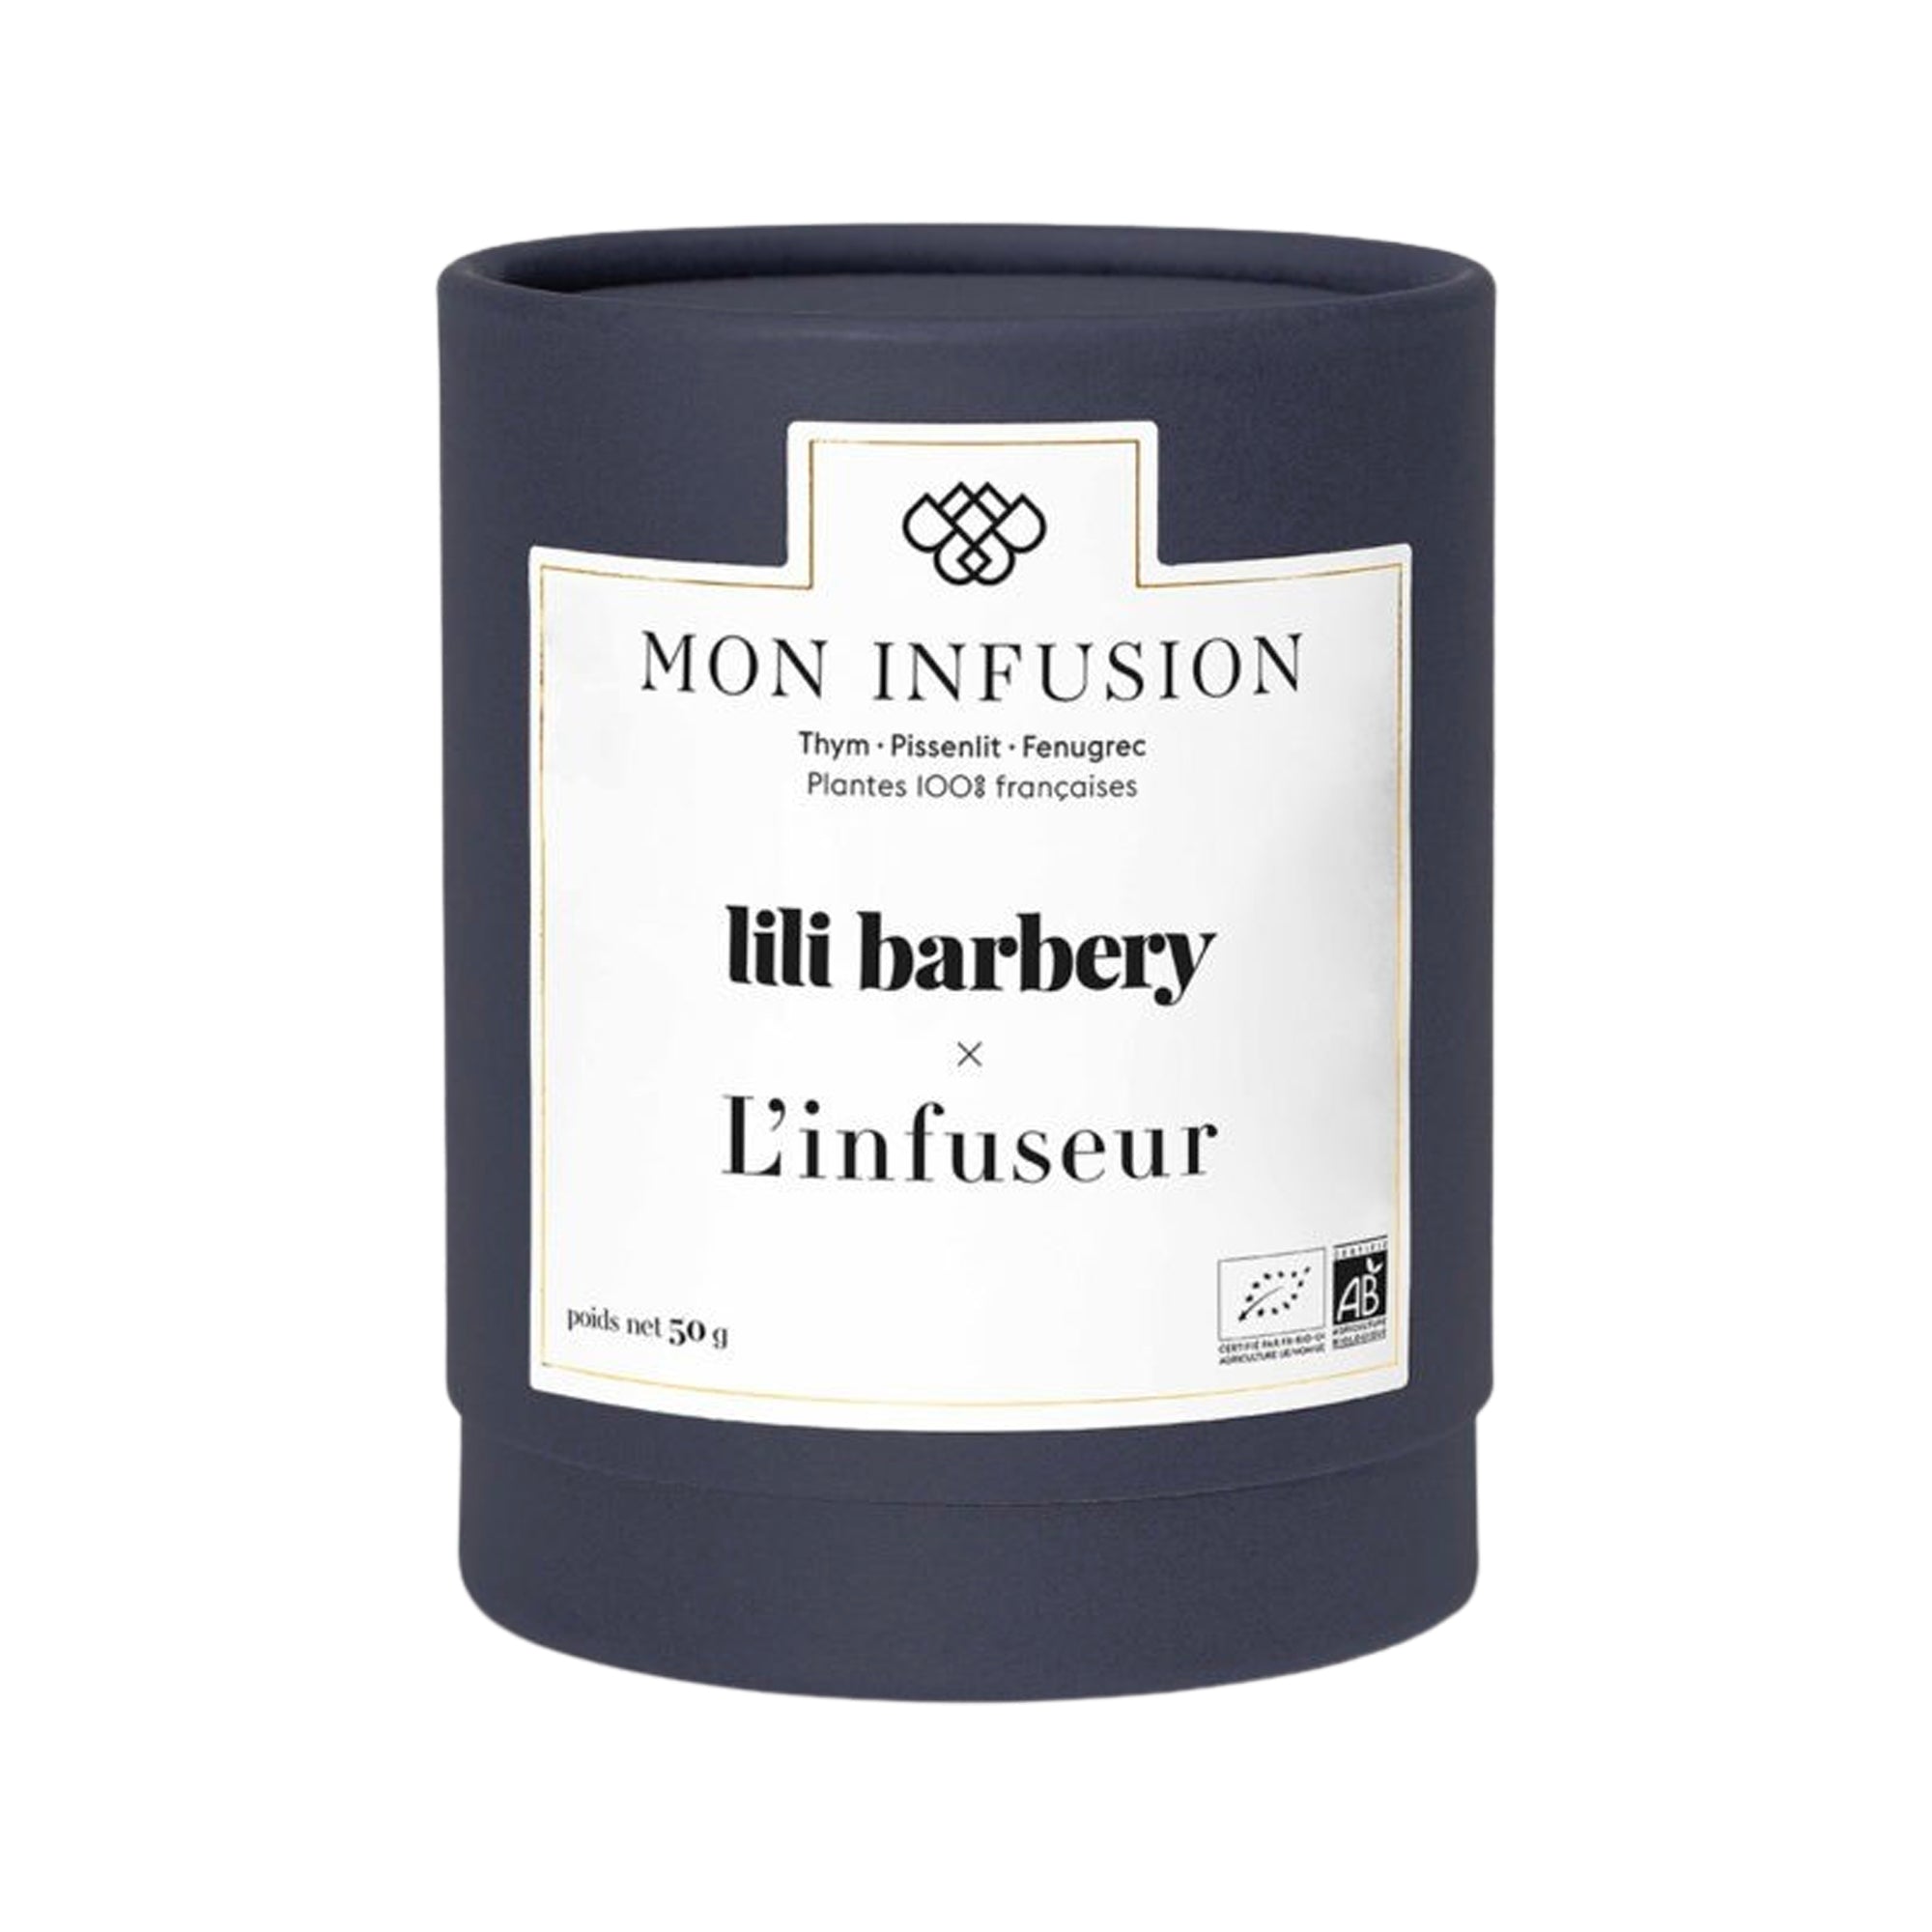 Infusion de Thym Bio - Feuille Entière 50g - My Organic Infusion